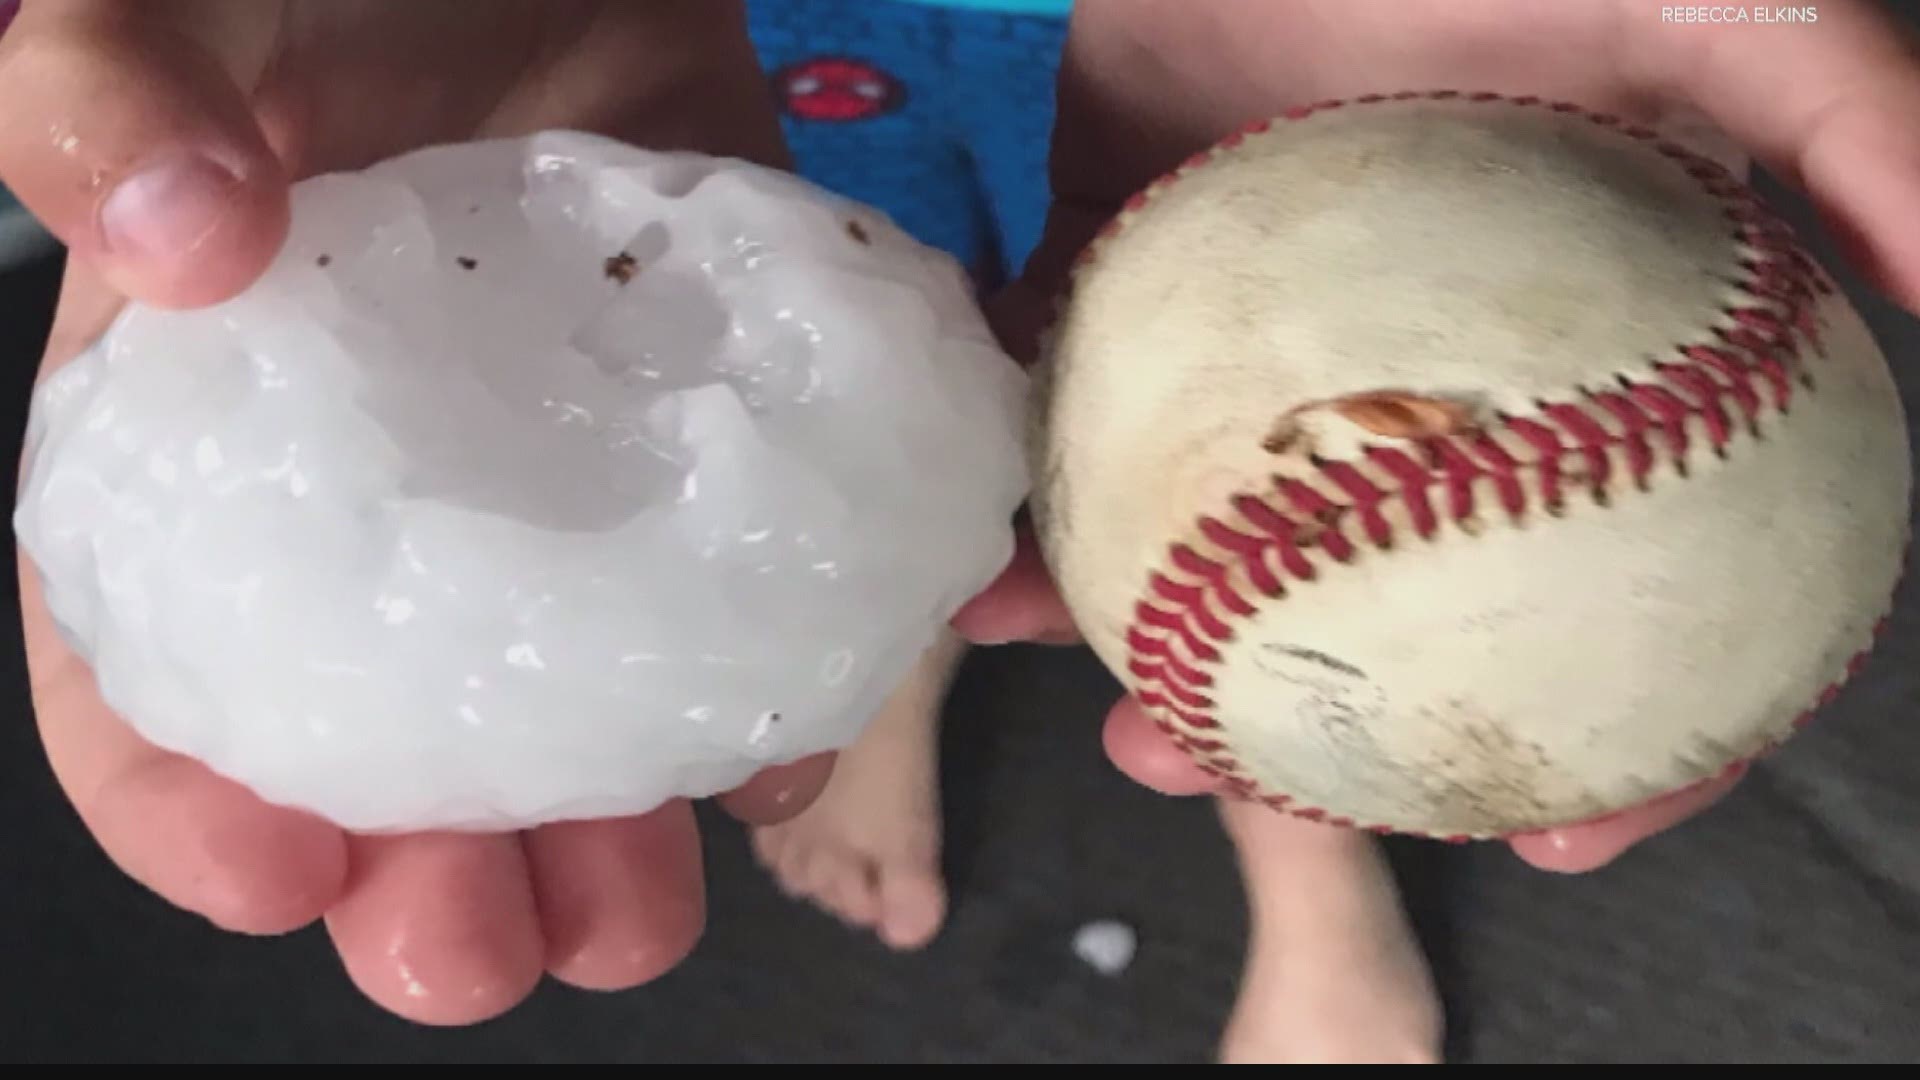 Another problem that thousands of people are dealing with after Friday's storms is hail damage.